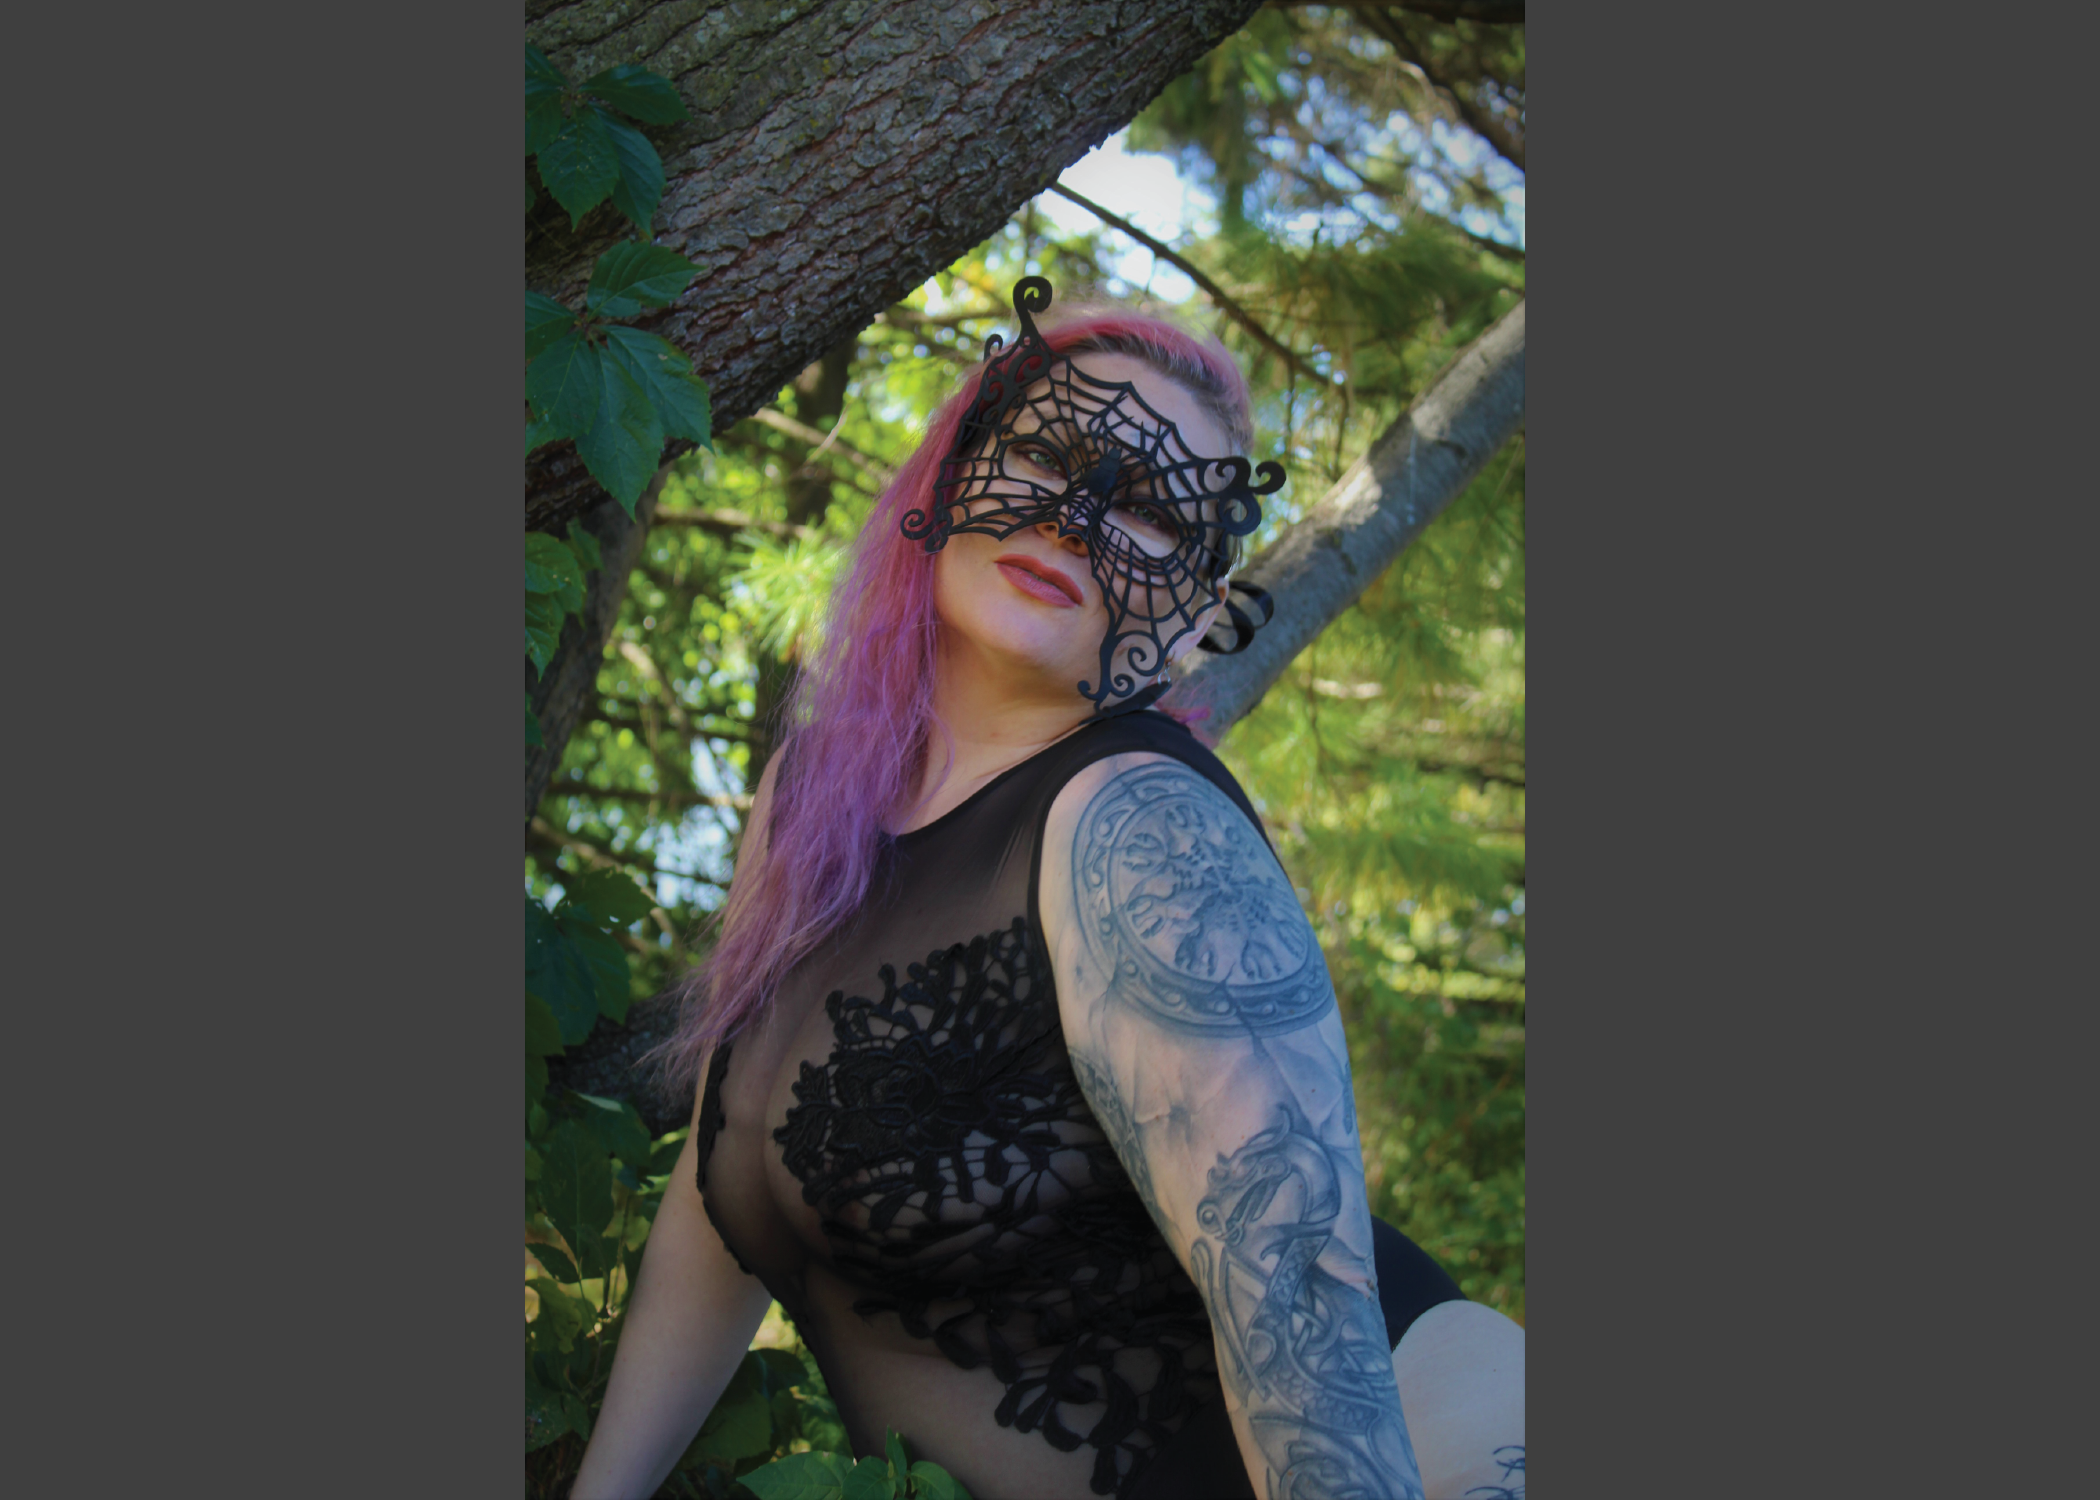 Photo of a Beautiful Woman with Pink Hair posing in black lingerie wearing a beautiful, spiderweb mask. Masquerade style mask made of leather, looks like iace.